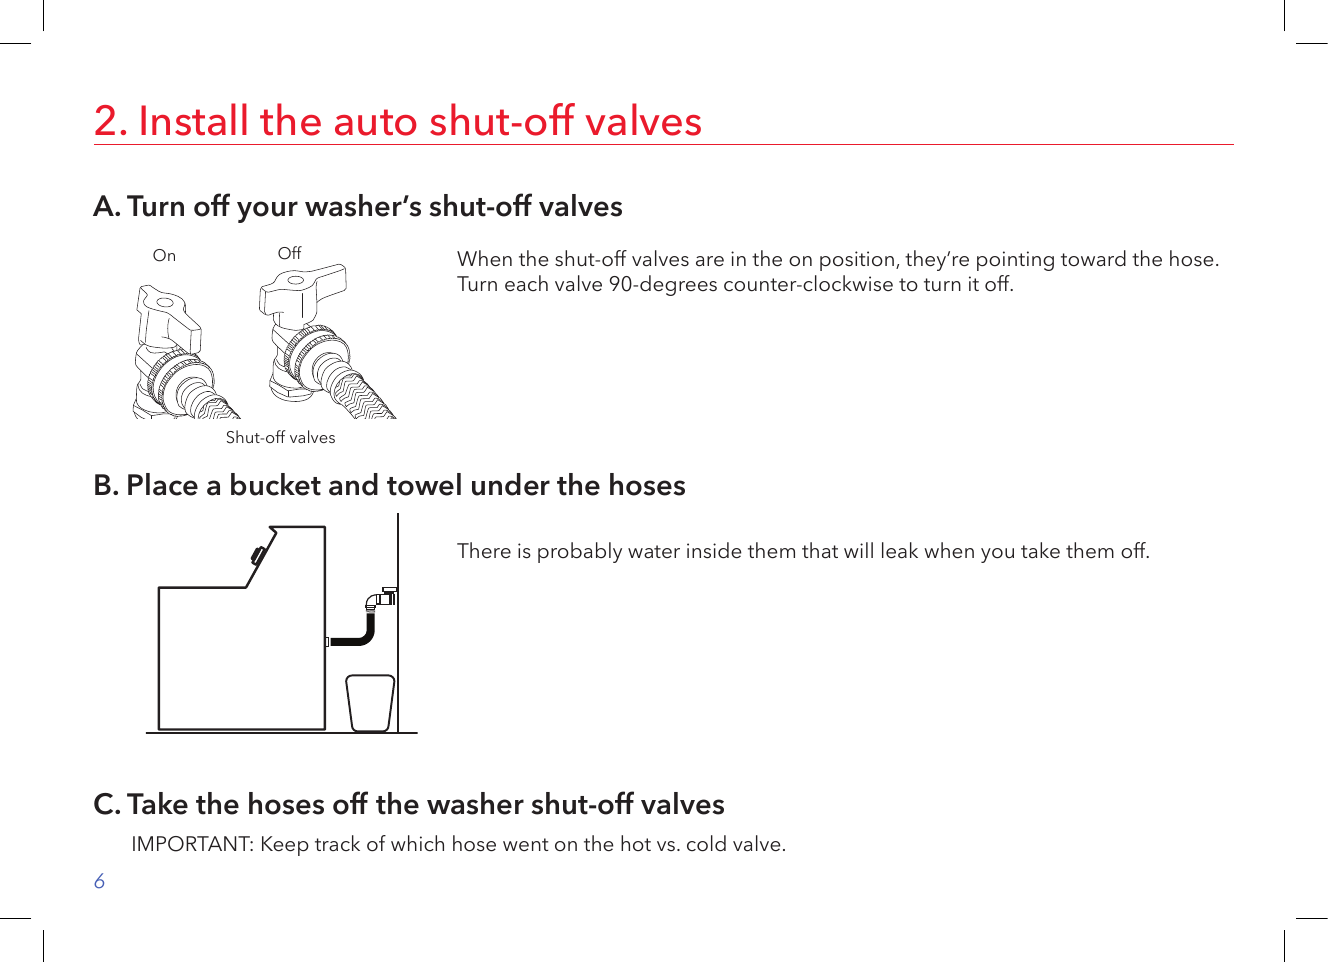 62. Install the auto shut-off valvesA. Turn off your washer’s shut-off valvesB. Place a bucket and towel under the hosesWhen the shut-off valves are in the on position, they’re pointing toward the hose. Turn each valve 90-degrees counter-clockwise to turn it off.Shut-off valvesOn OffThere is probably water inside them that will leak when you take them off.C. Take the hoses off the washer shut-off valvesIMPORTANT: Keep track of which hose went on the hot vs. cold valve.